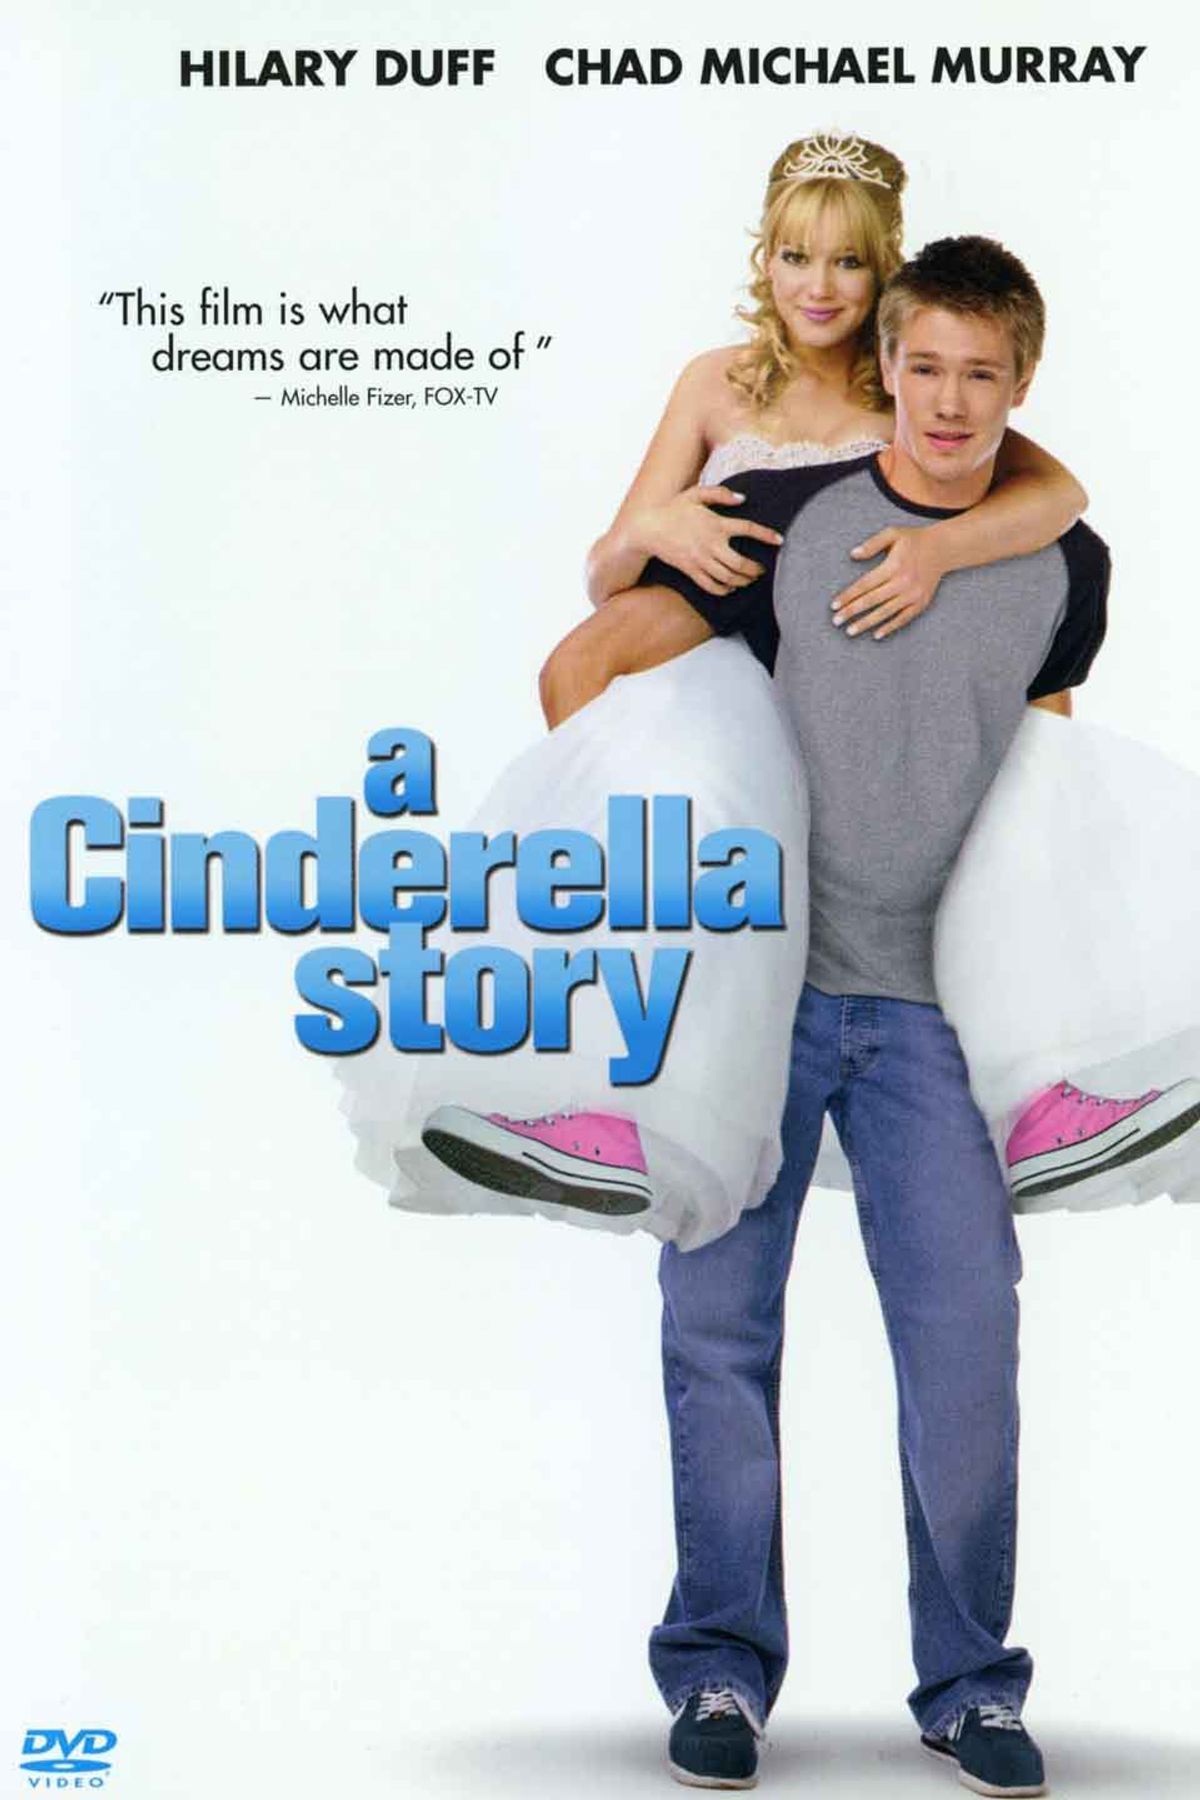 10 Things I Learned From "A Cinderella Story"